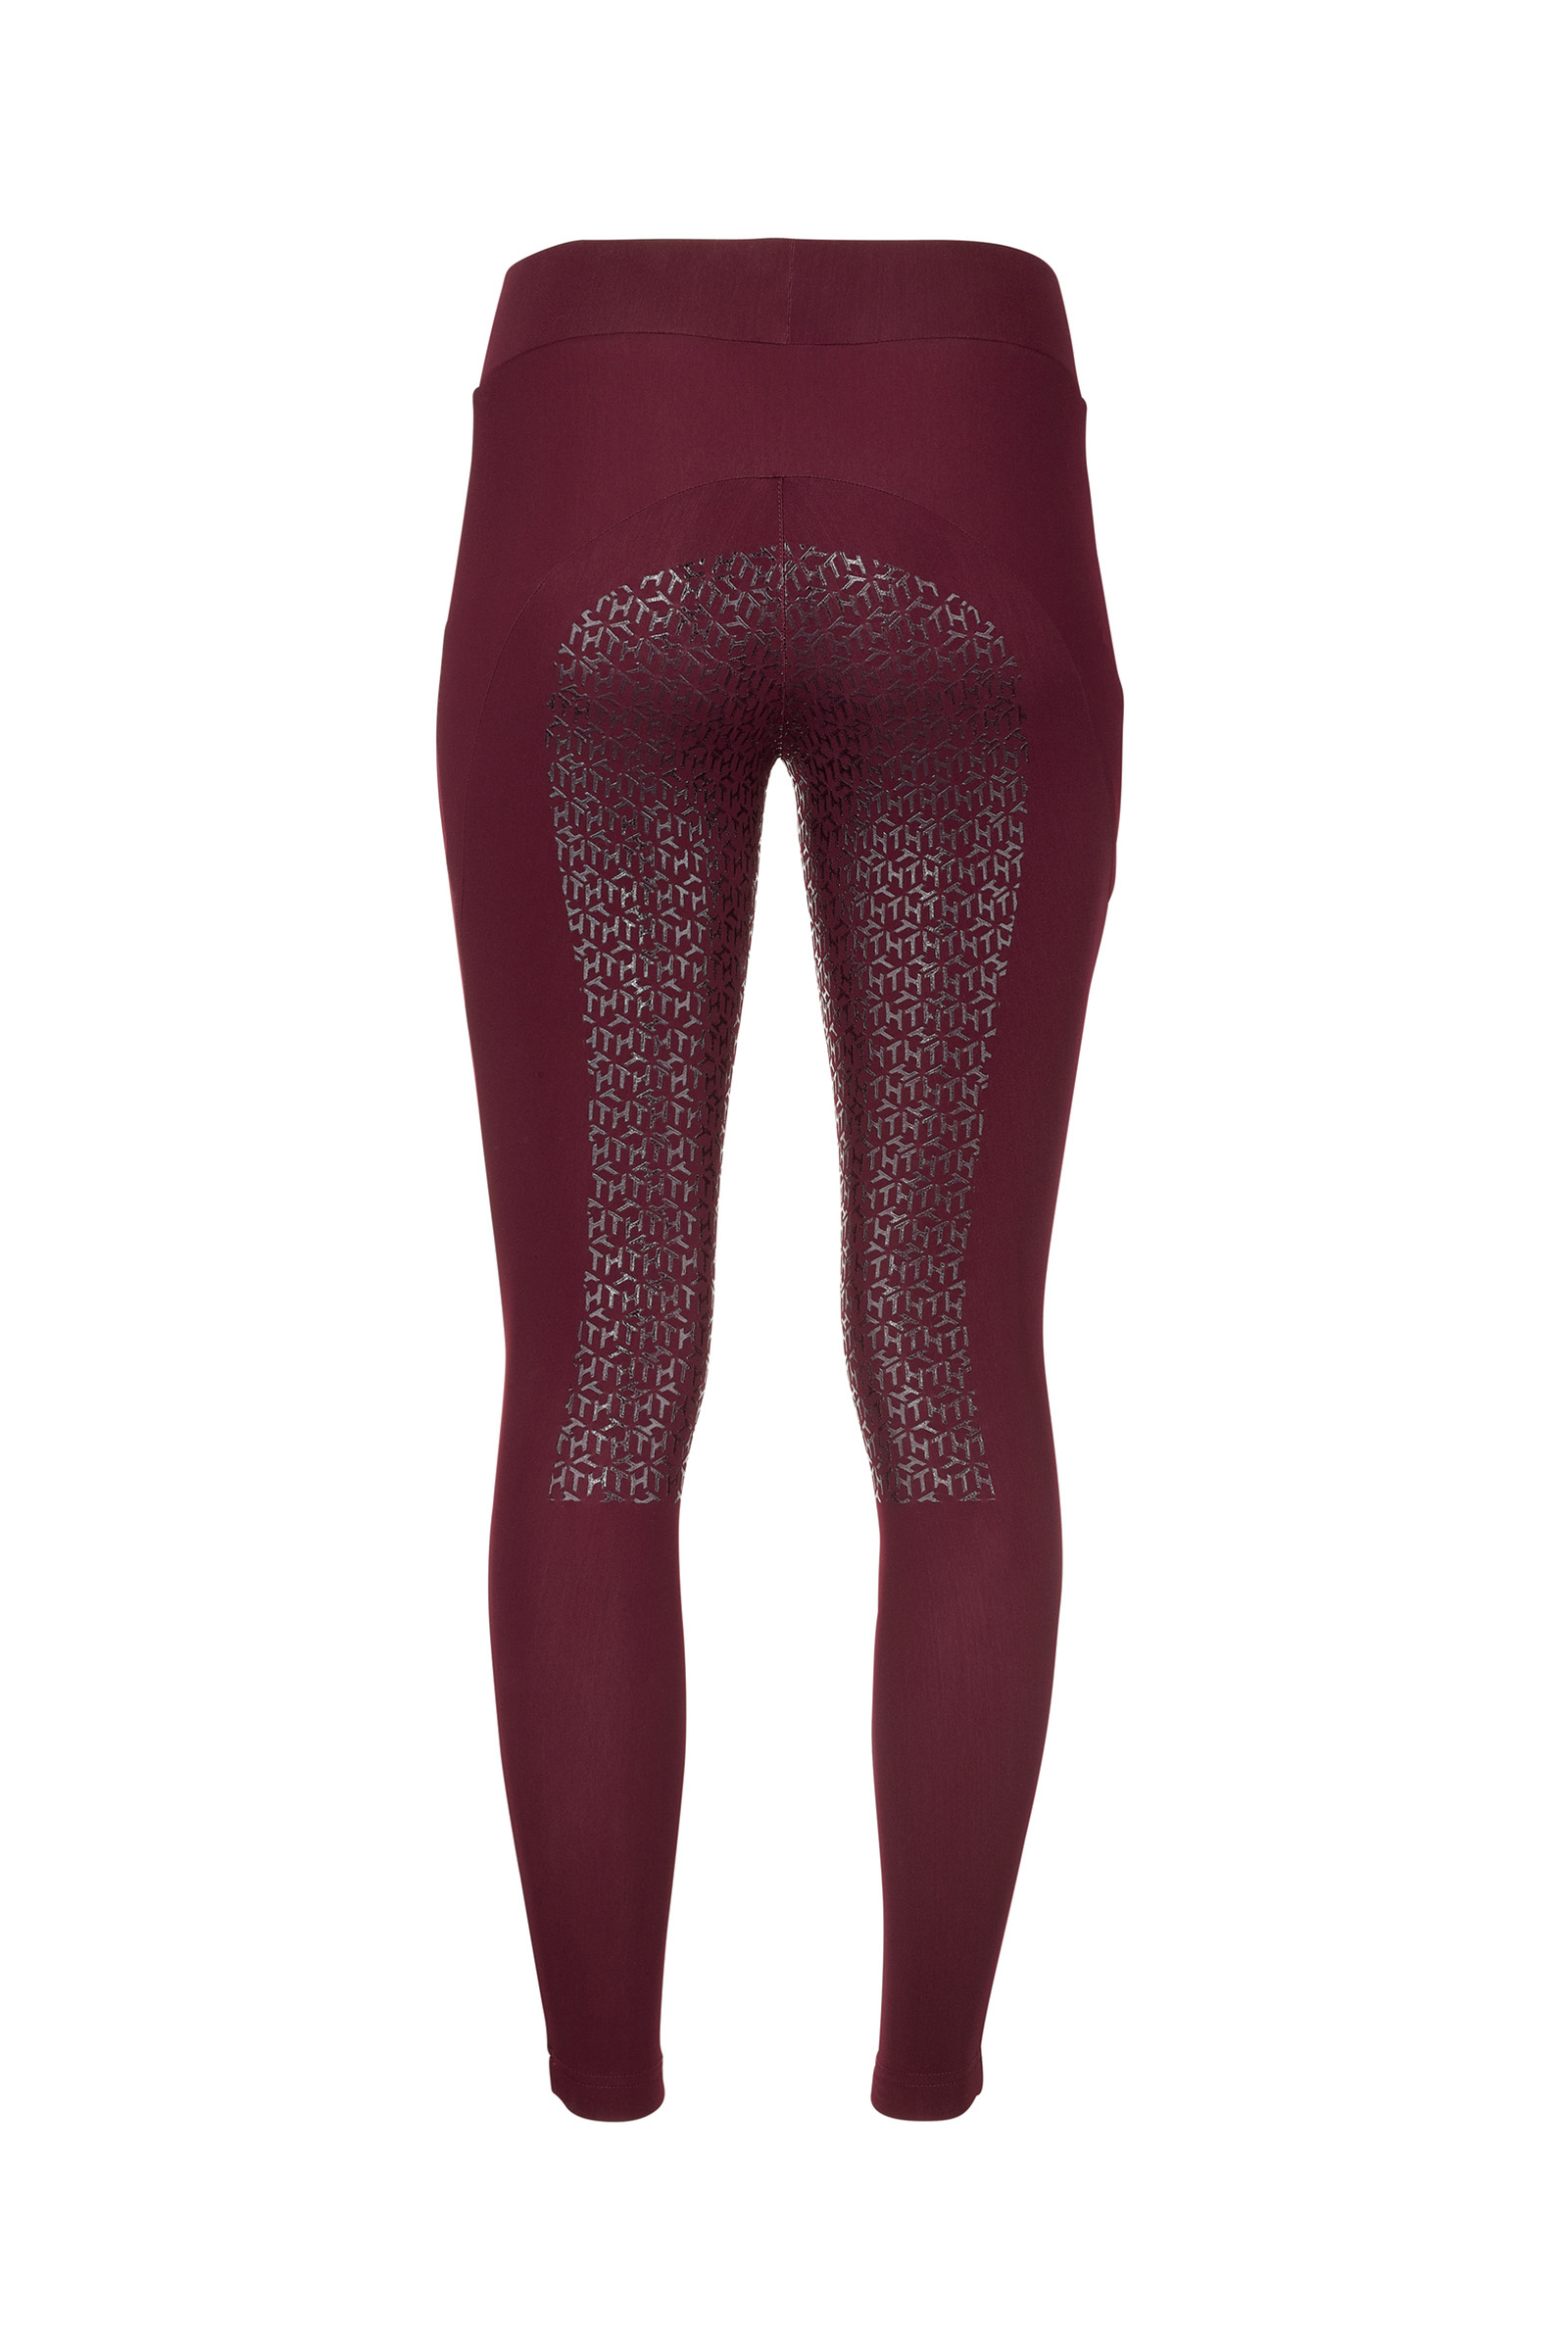 Thermal Fleece Lined Riding Tights - BERRY